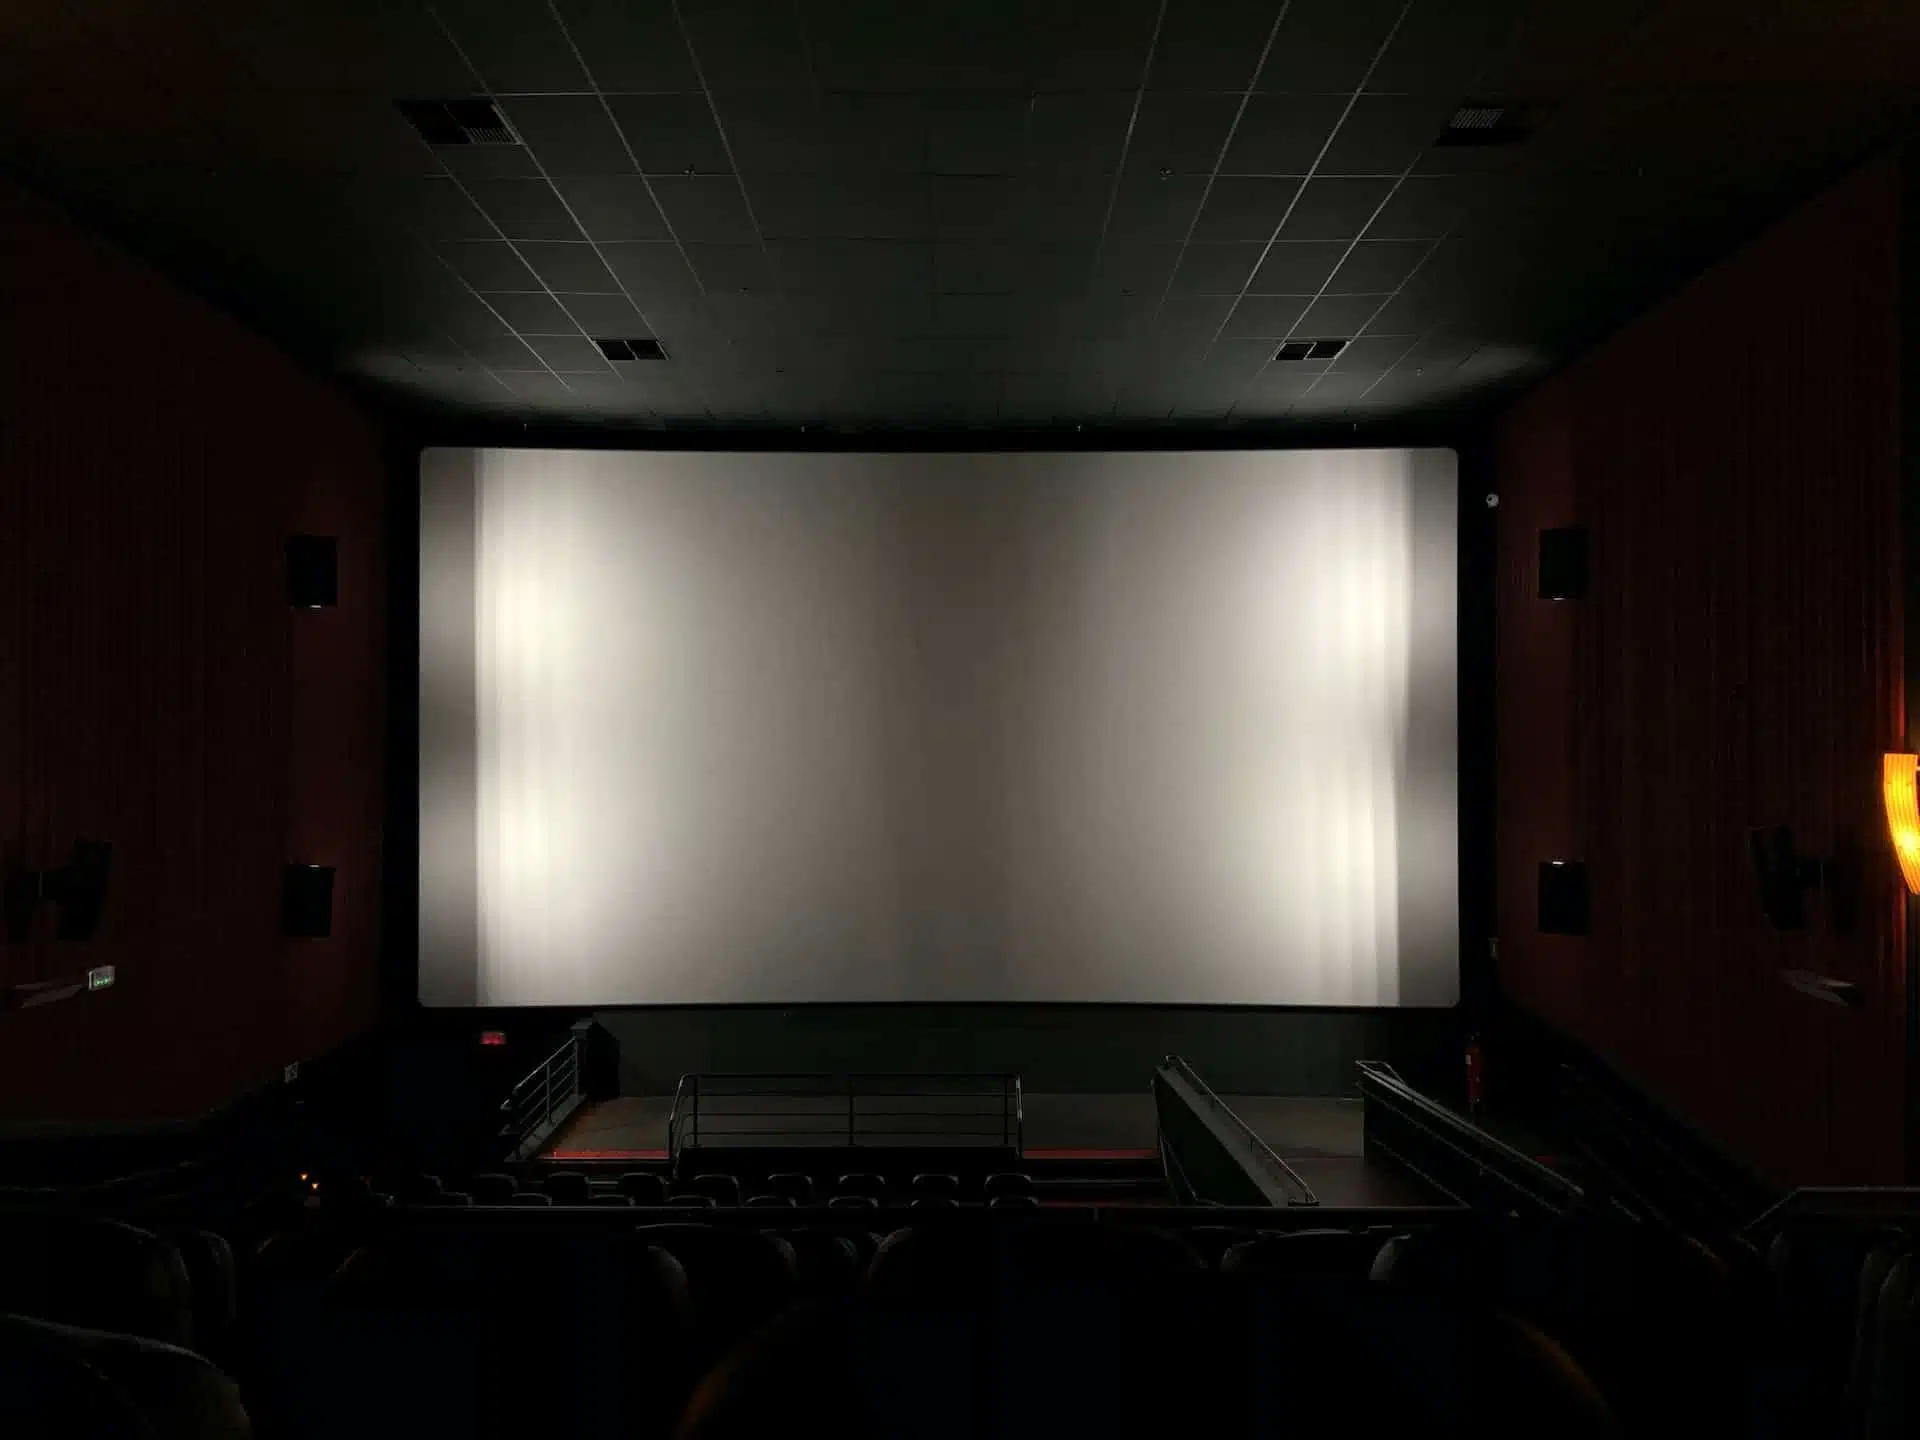 How To Make A Pull Down Projector Screen